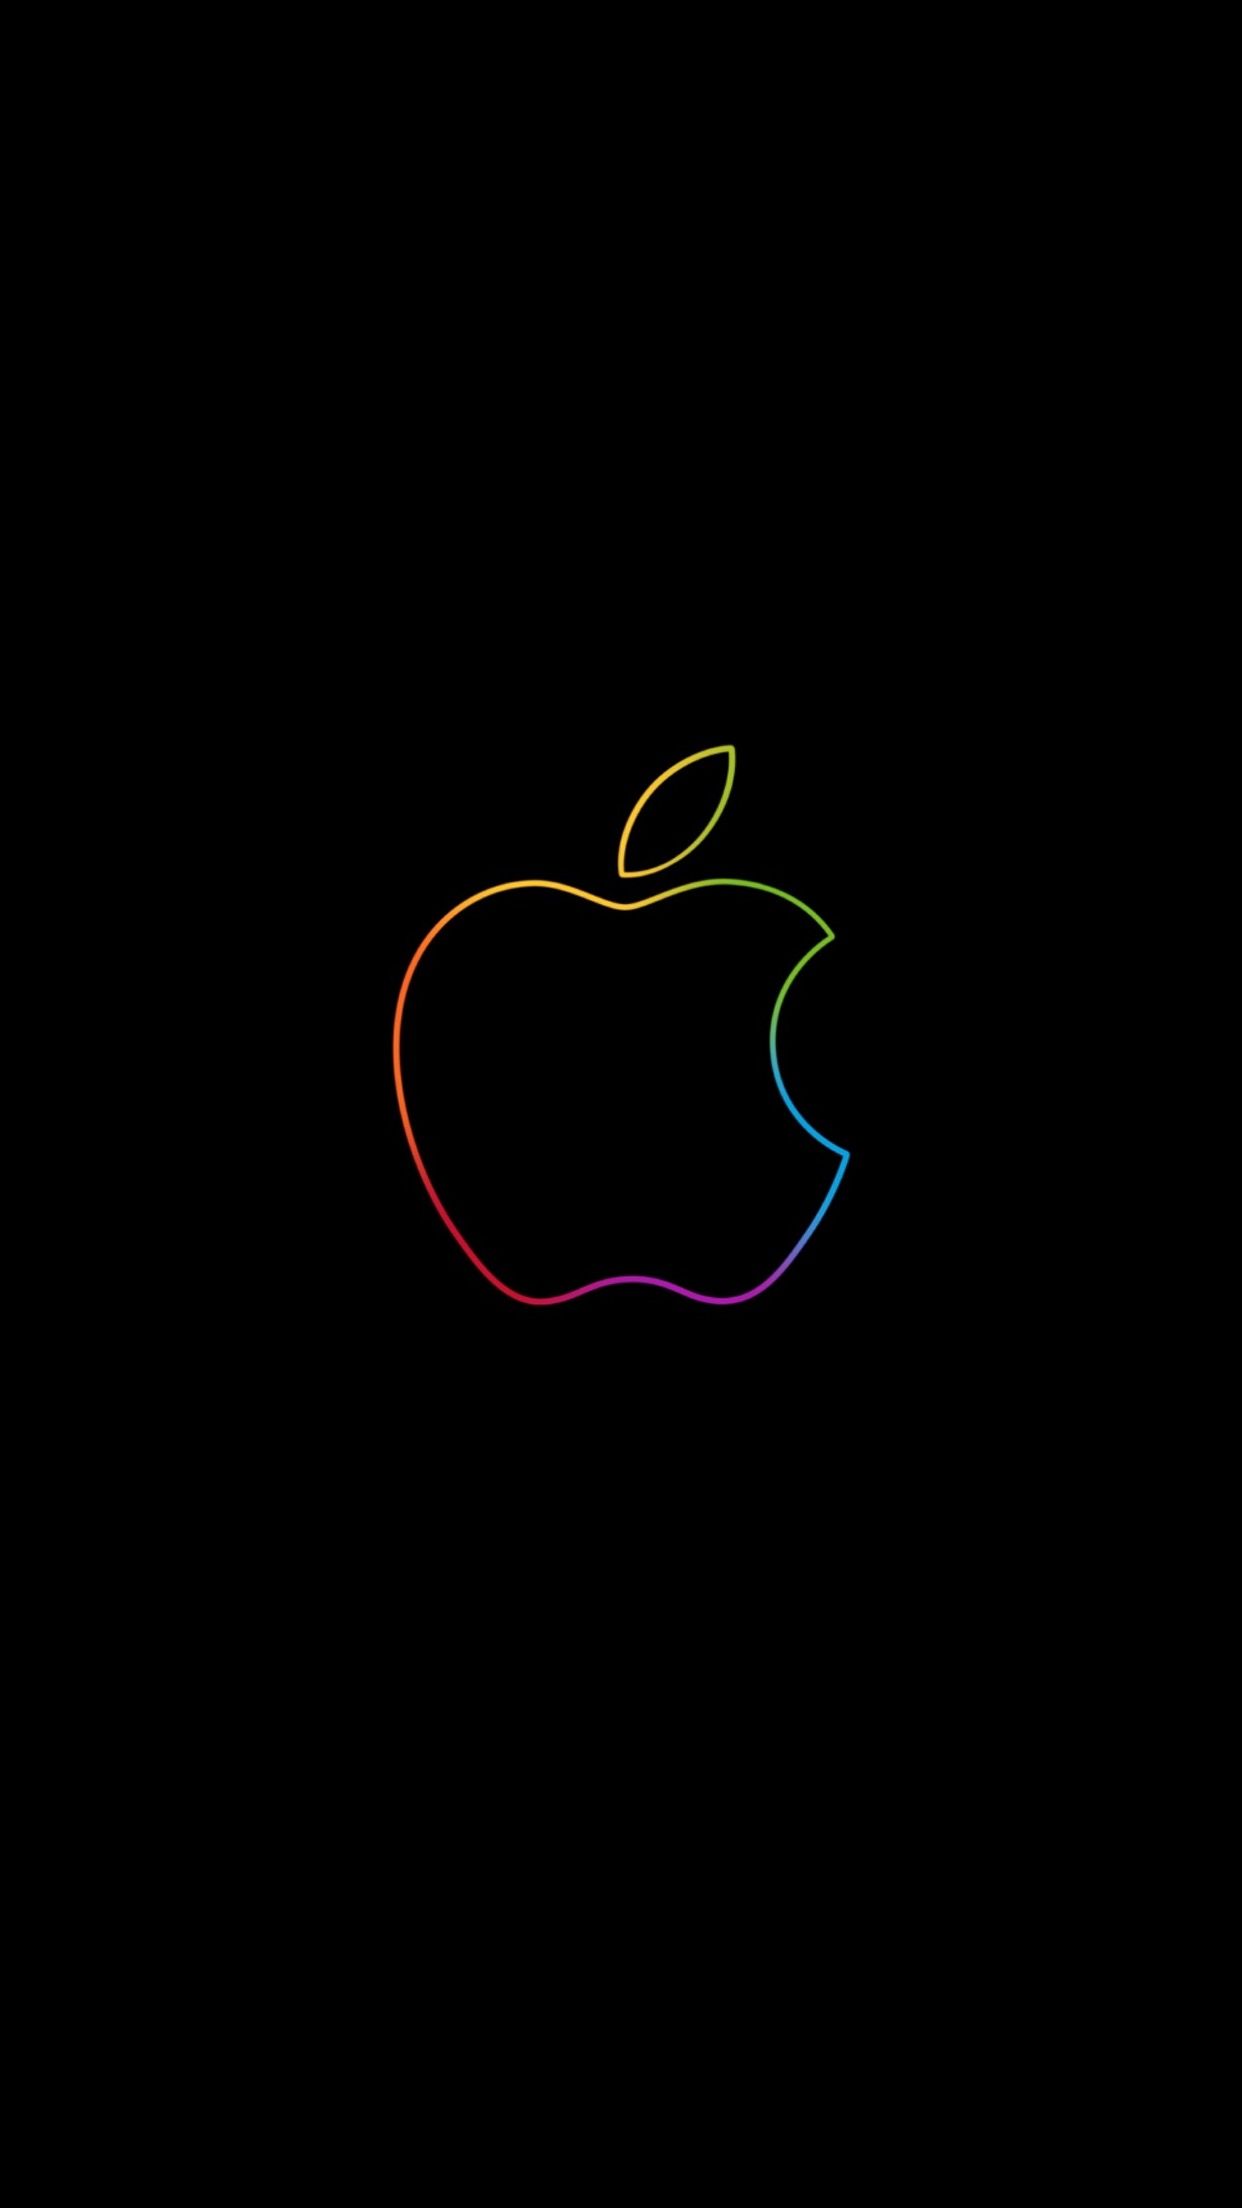 Apple Company Wallpapers - Wallpaper Cave